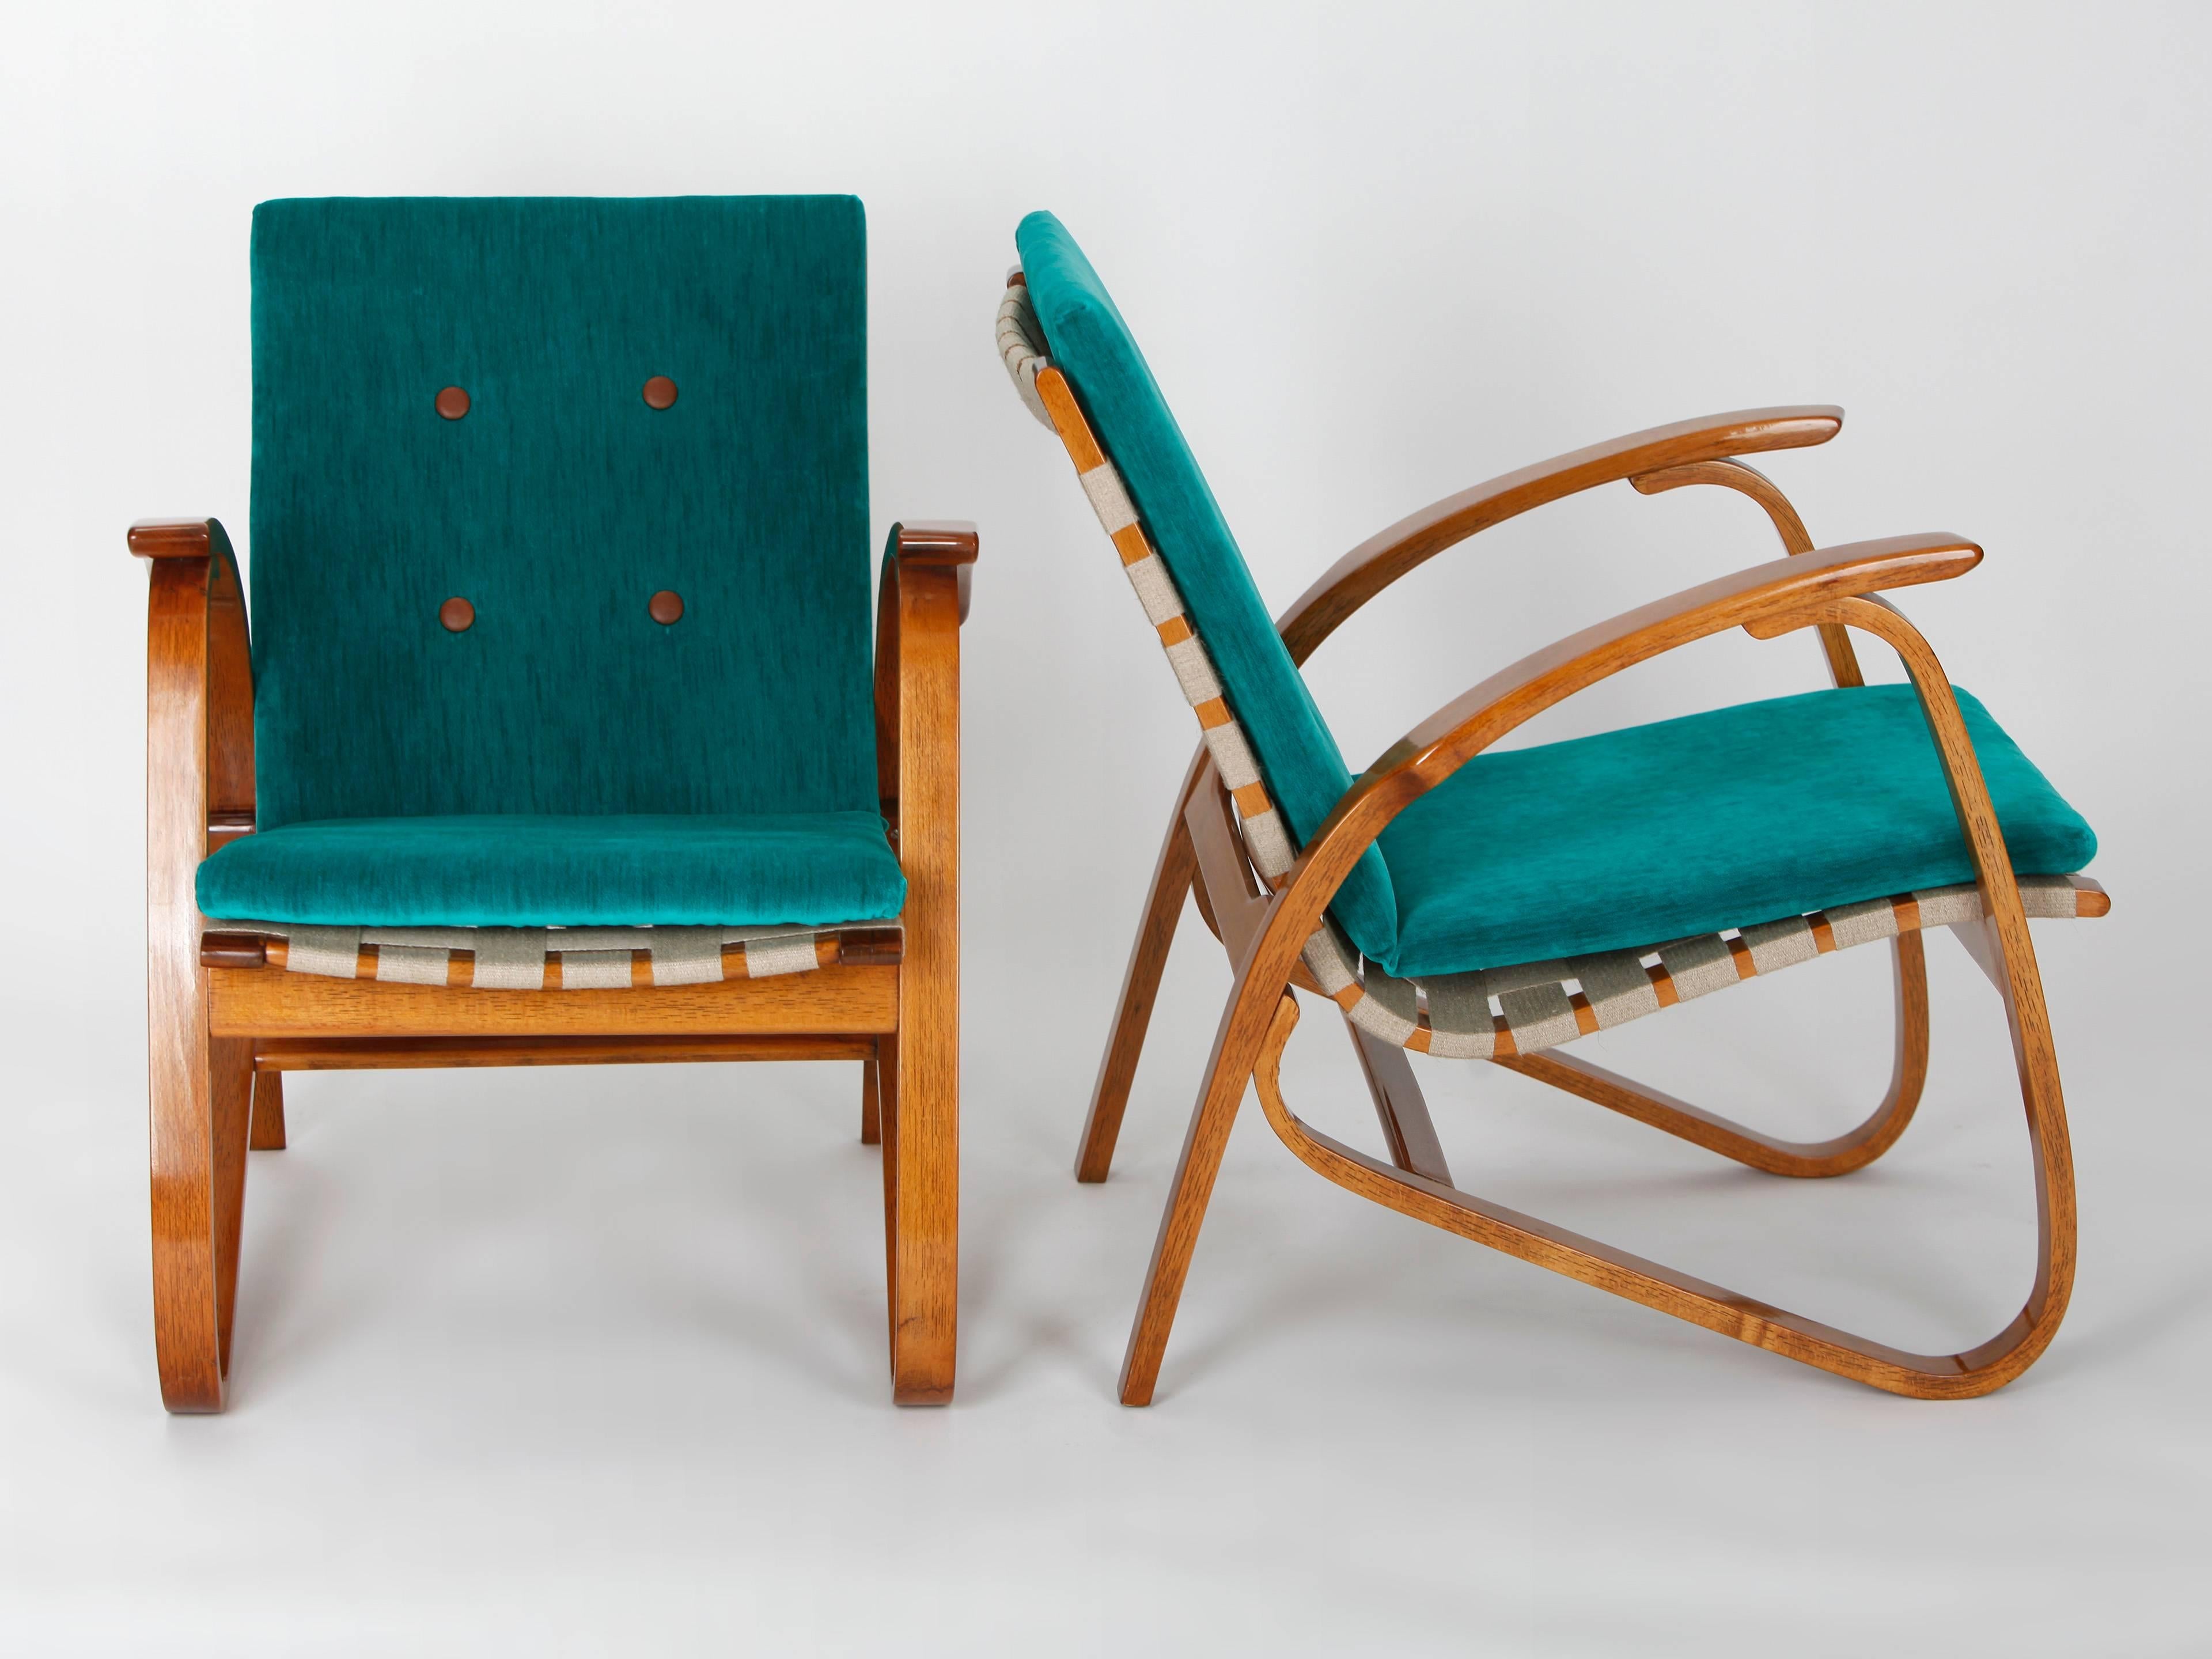 These two armchairs were designed by Jan Vanek in the 1930s. The hemp straps have been renewed and the wooden parts have been relacquered. The cushions have a core of pressed coconut fibers. The chairs have been upholstered with an English velvet